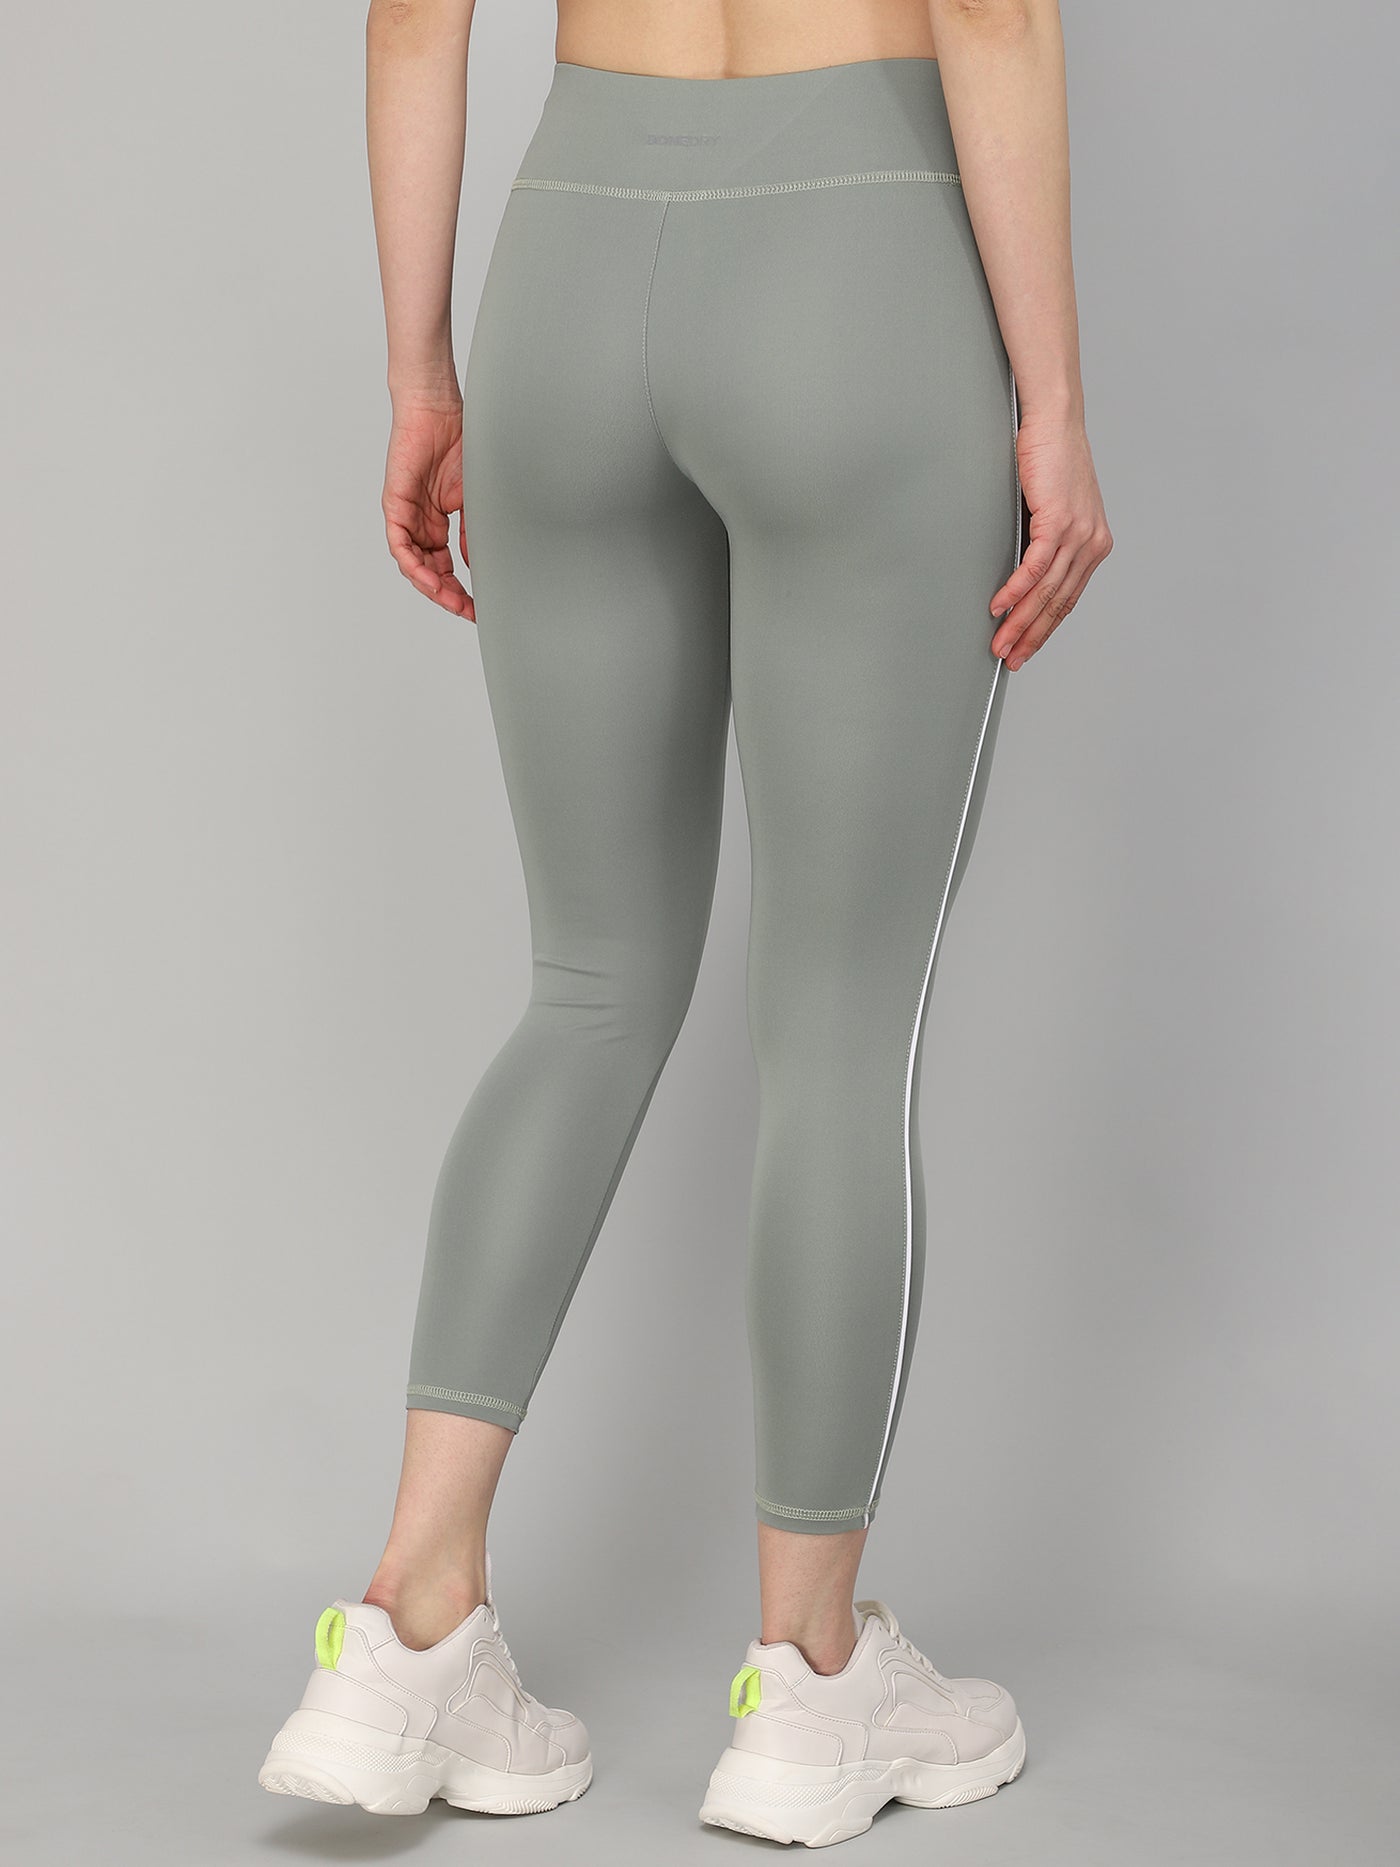 Gym/Yoga High Waist Side White Piping Tight - Light Green